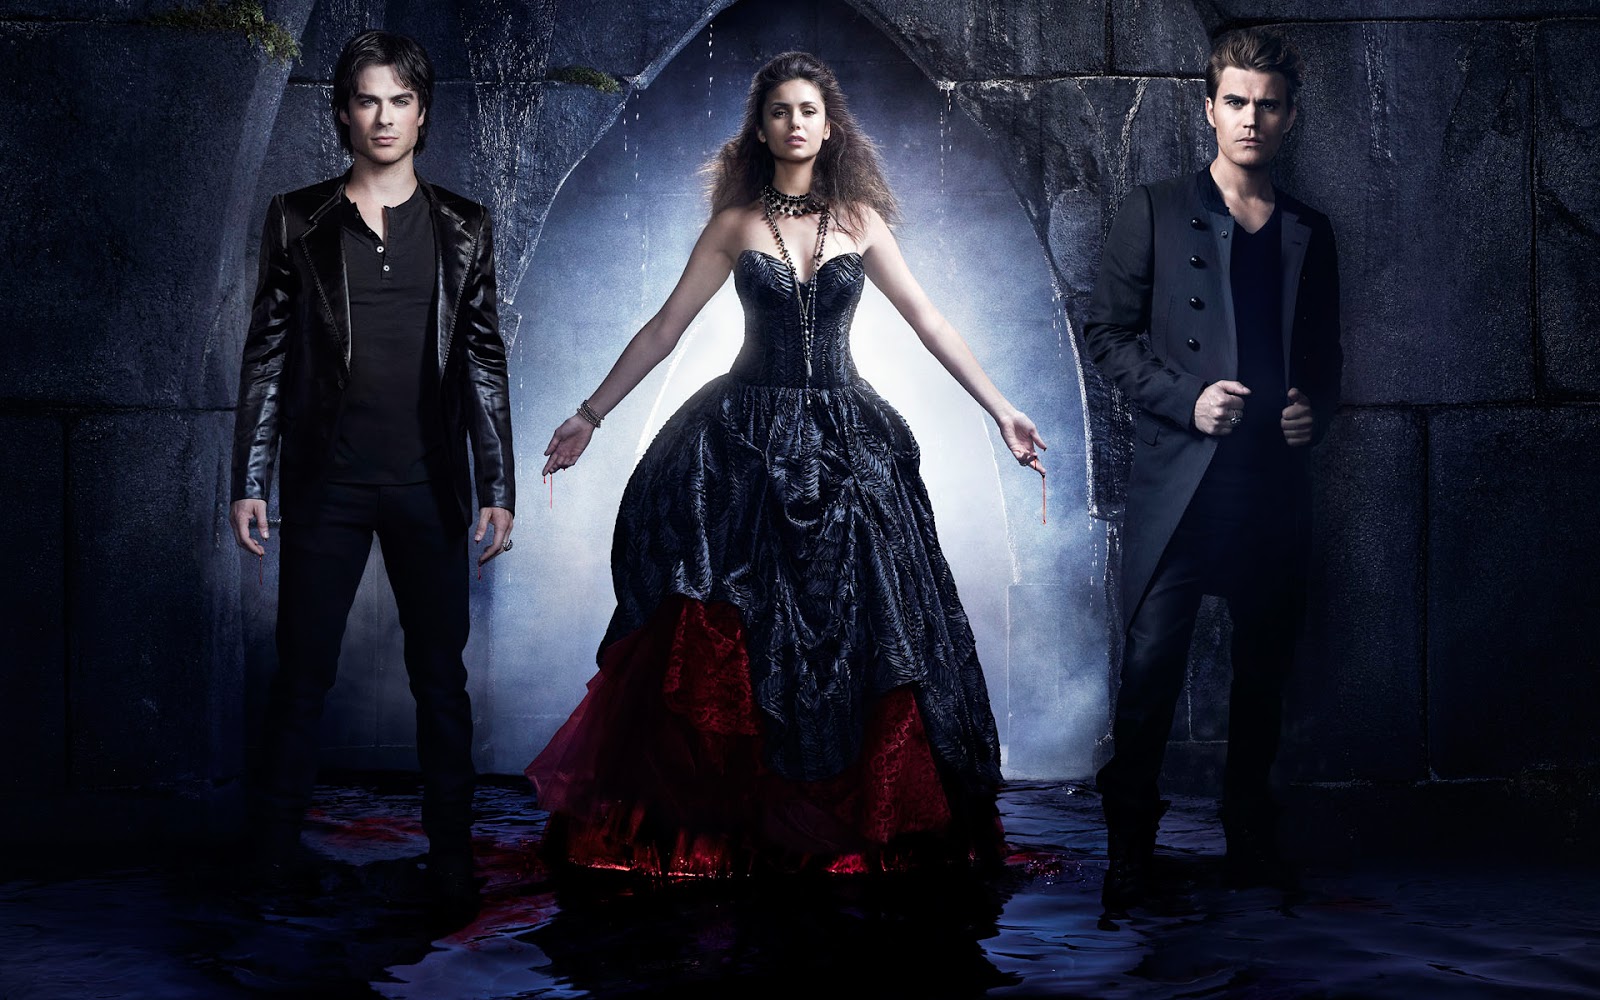 USD POLL : Which regular character(s) do you think will die on The Vampire Diaries this season?